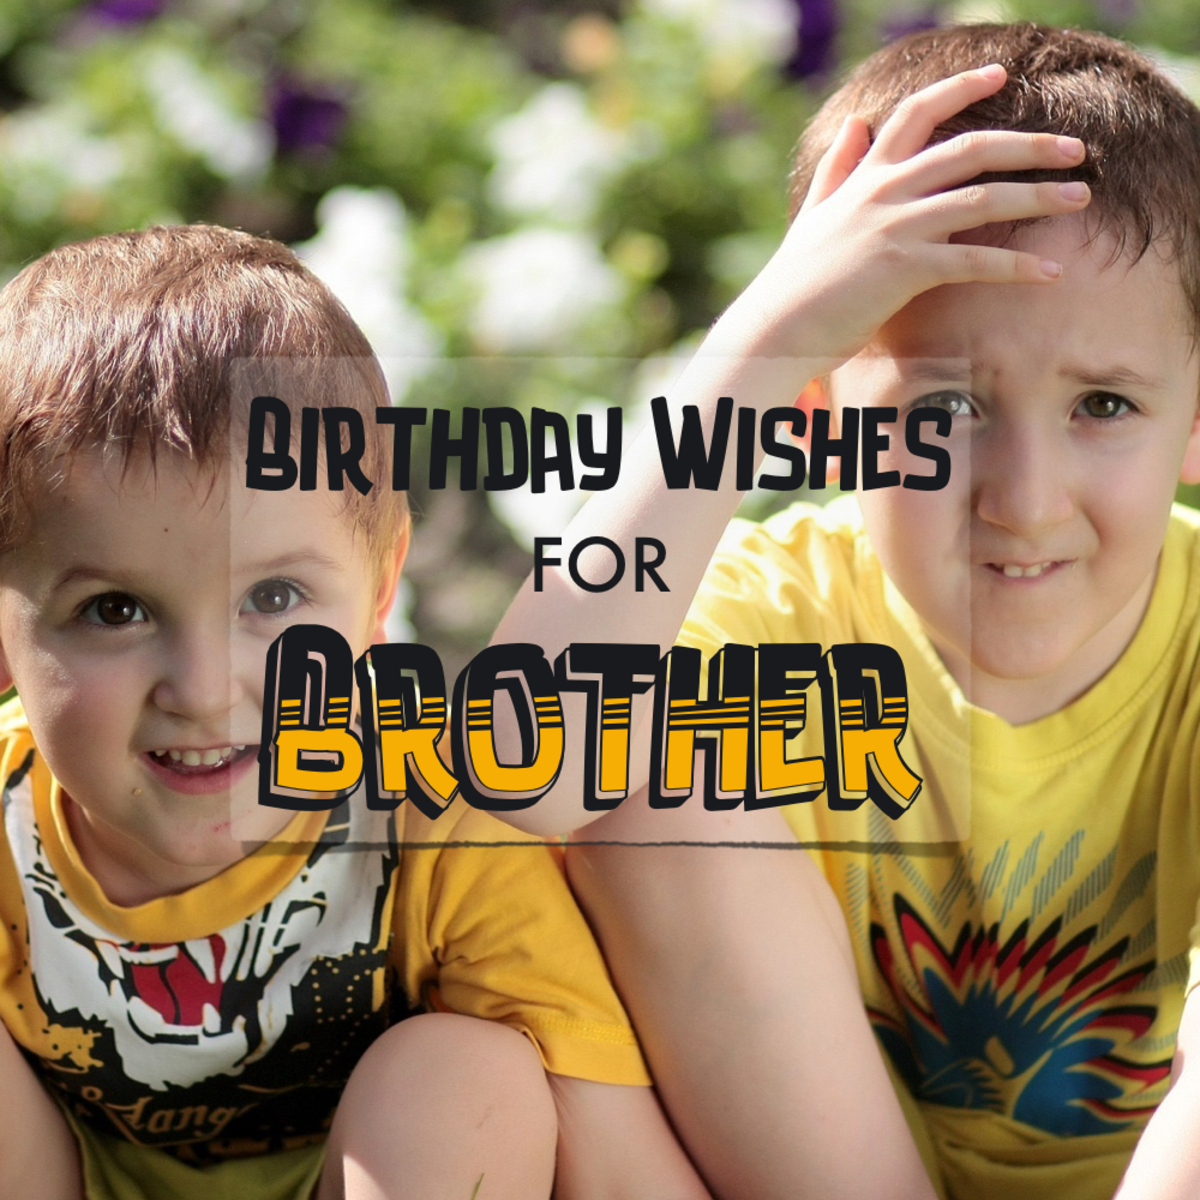 Birthday Wishes for Brother - Funny Quotes, Heartfelt / Sincere Poems